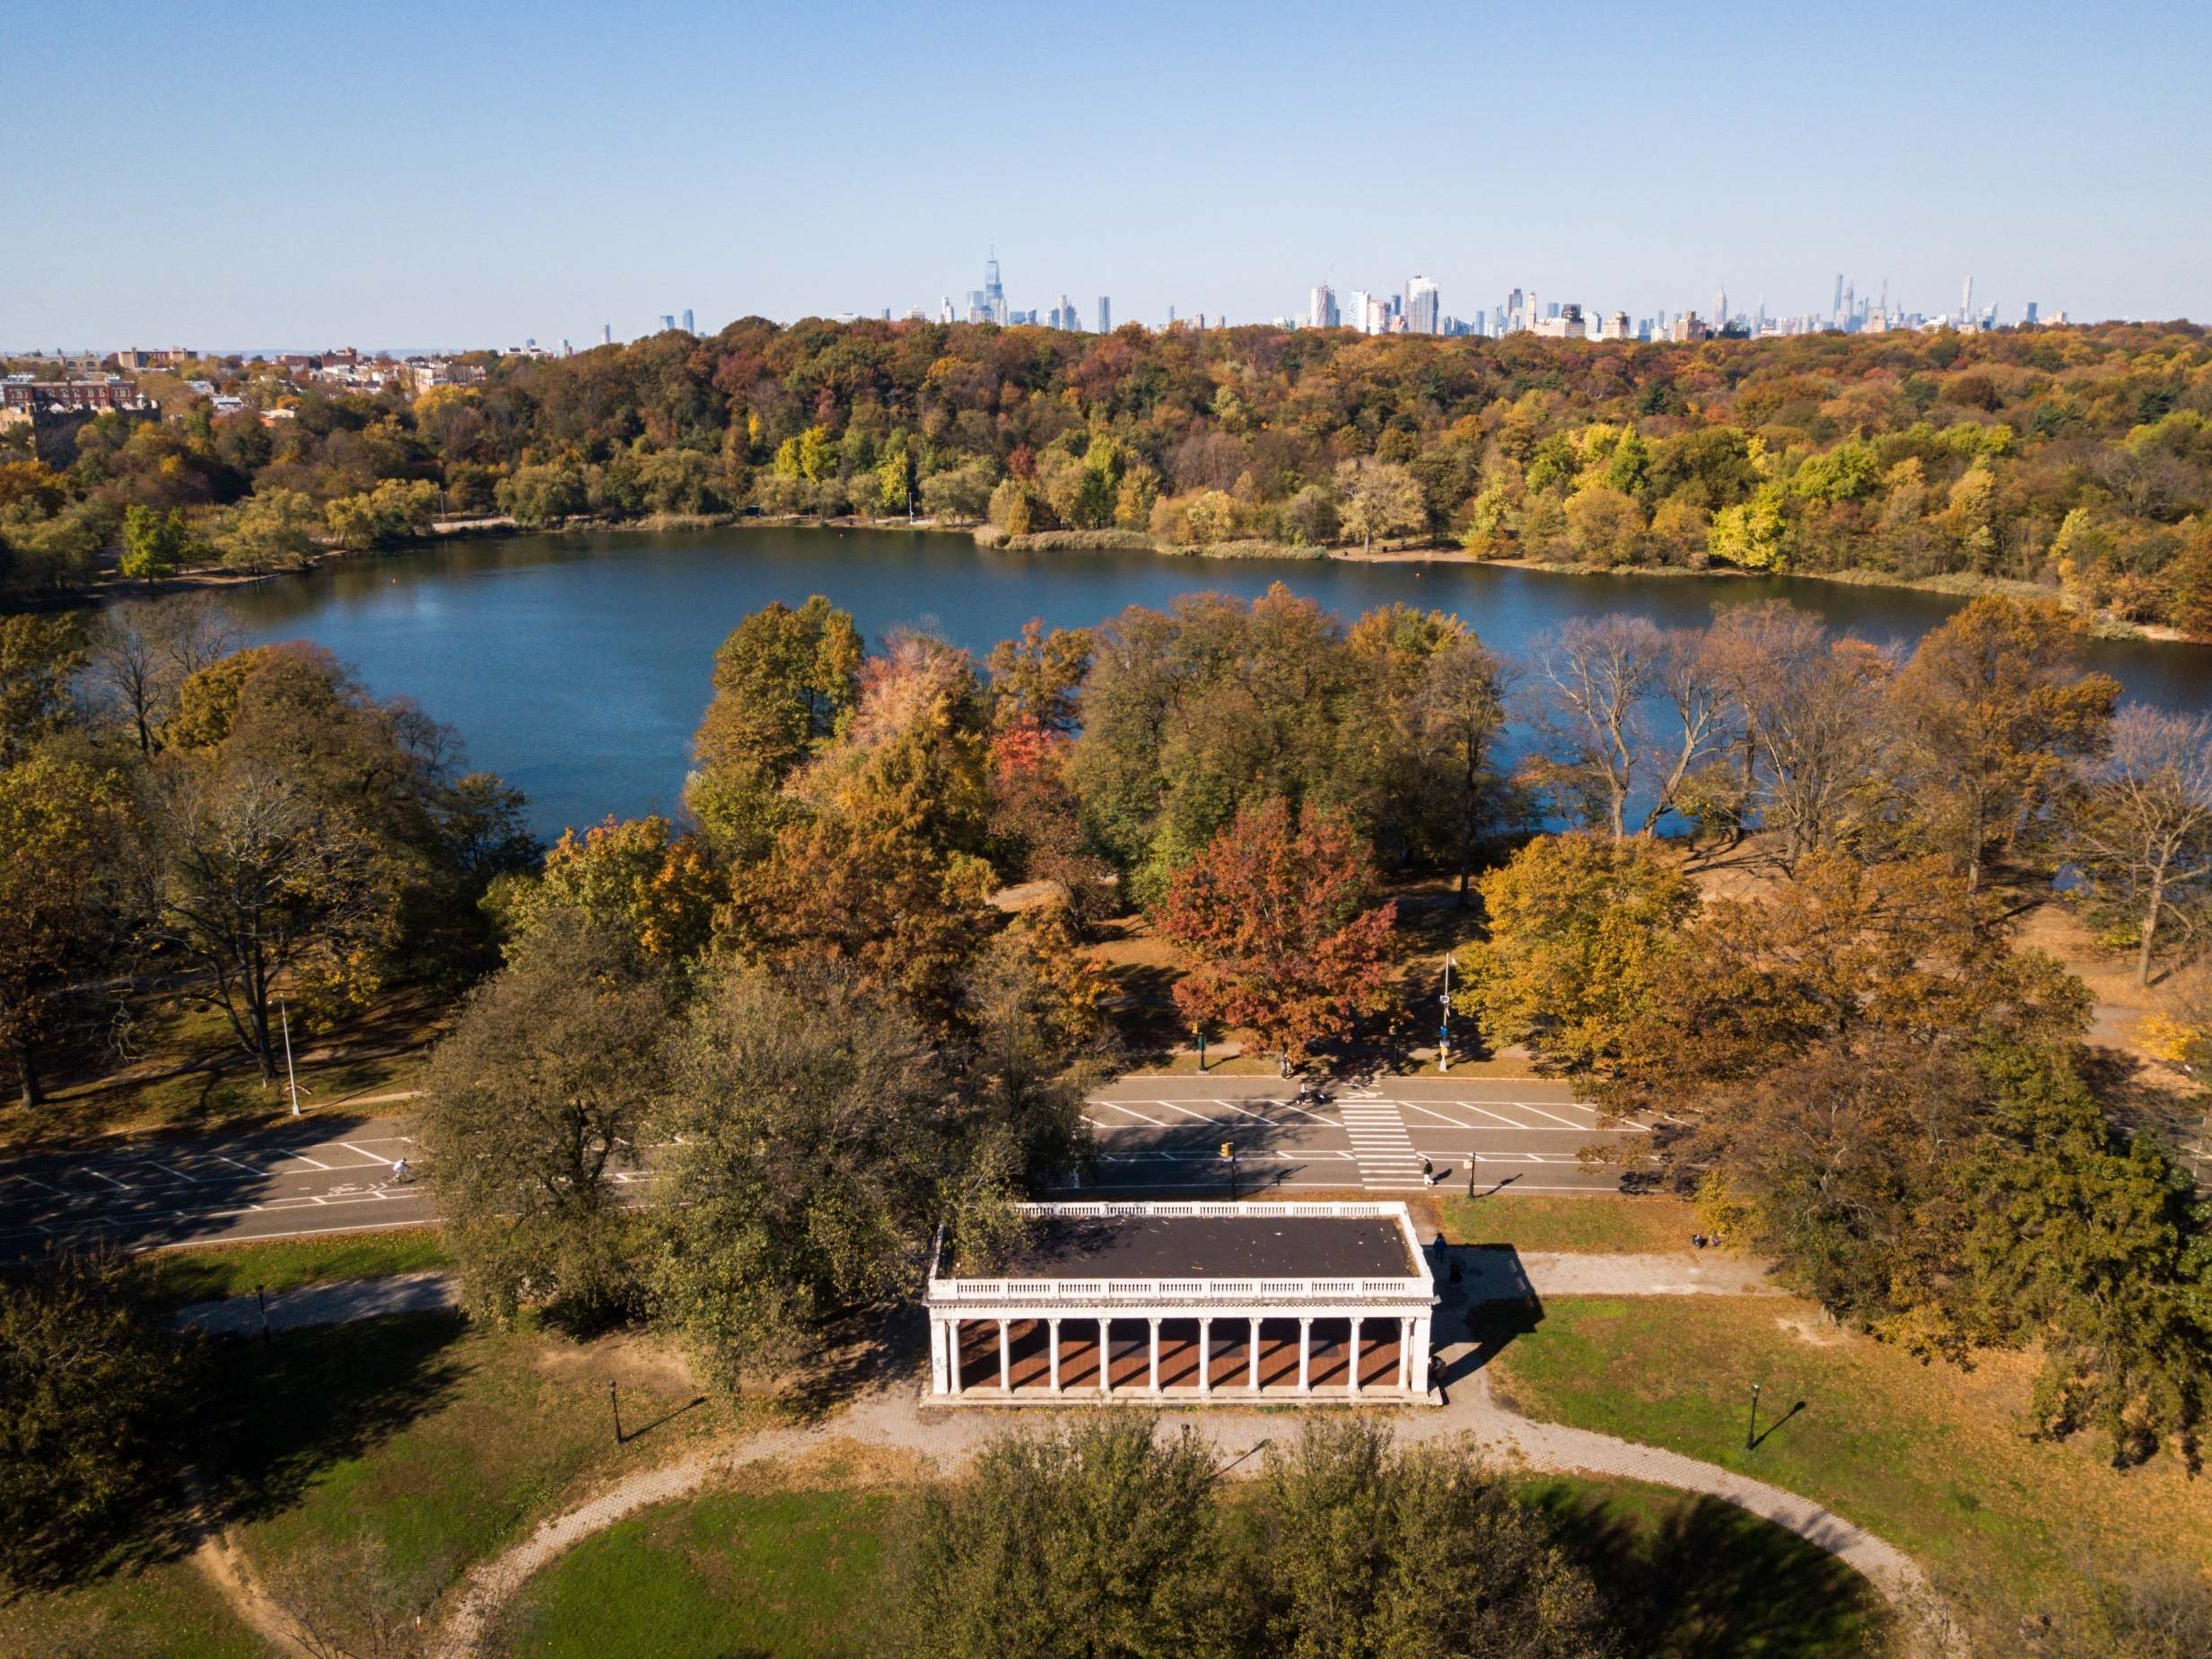 Prospect Park in Brooklyn offers an escape from the urban metropolis